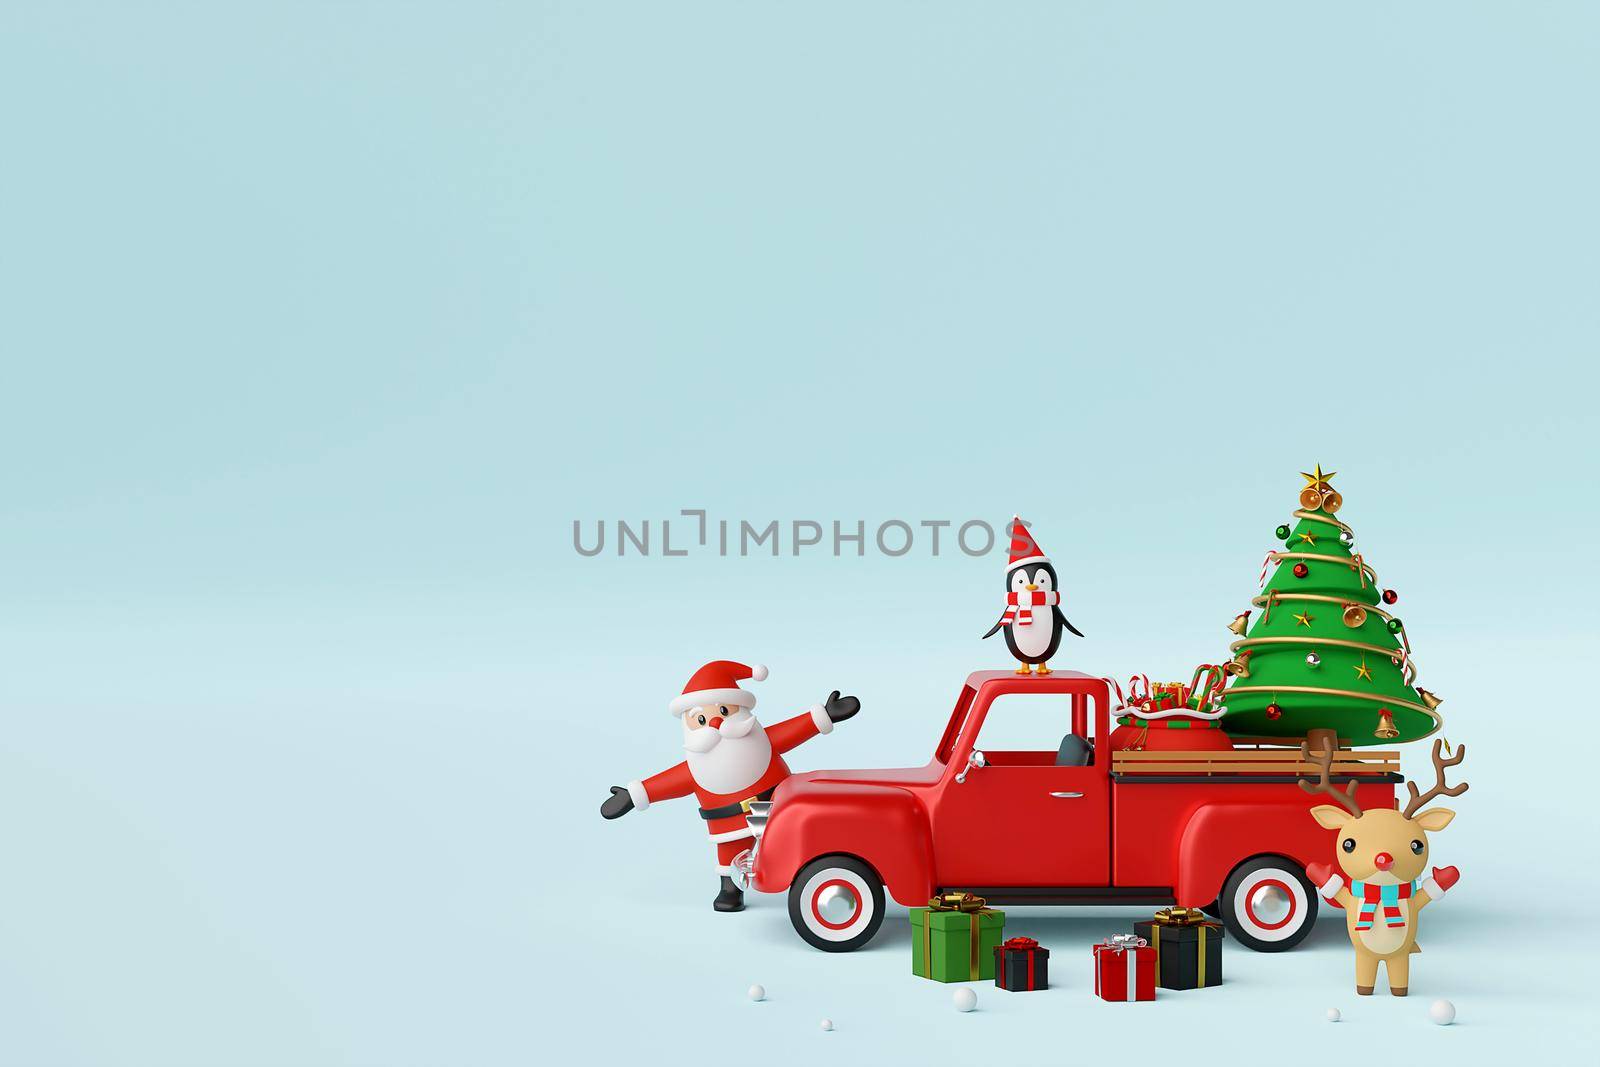 Merry Christmas and Happy New Year, Christmas celebration background with Christmas truck and Santa Claus , 3d rendering by nutzchotwarut